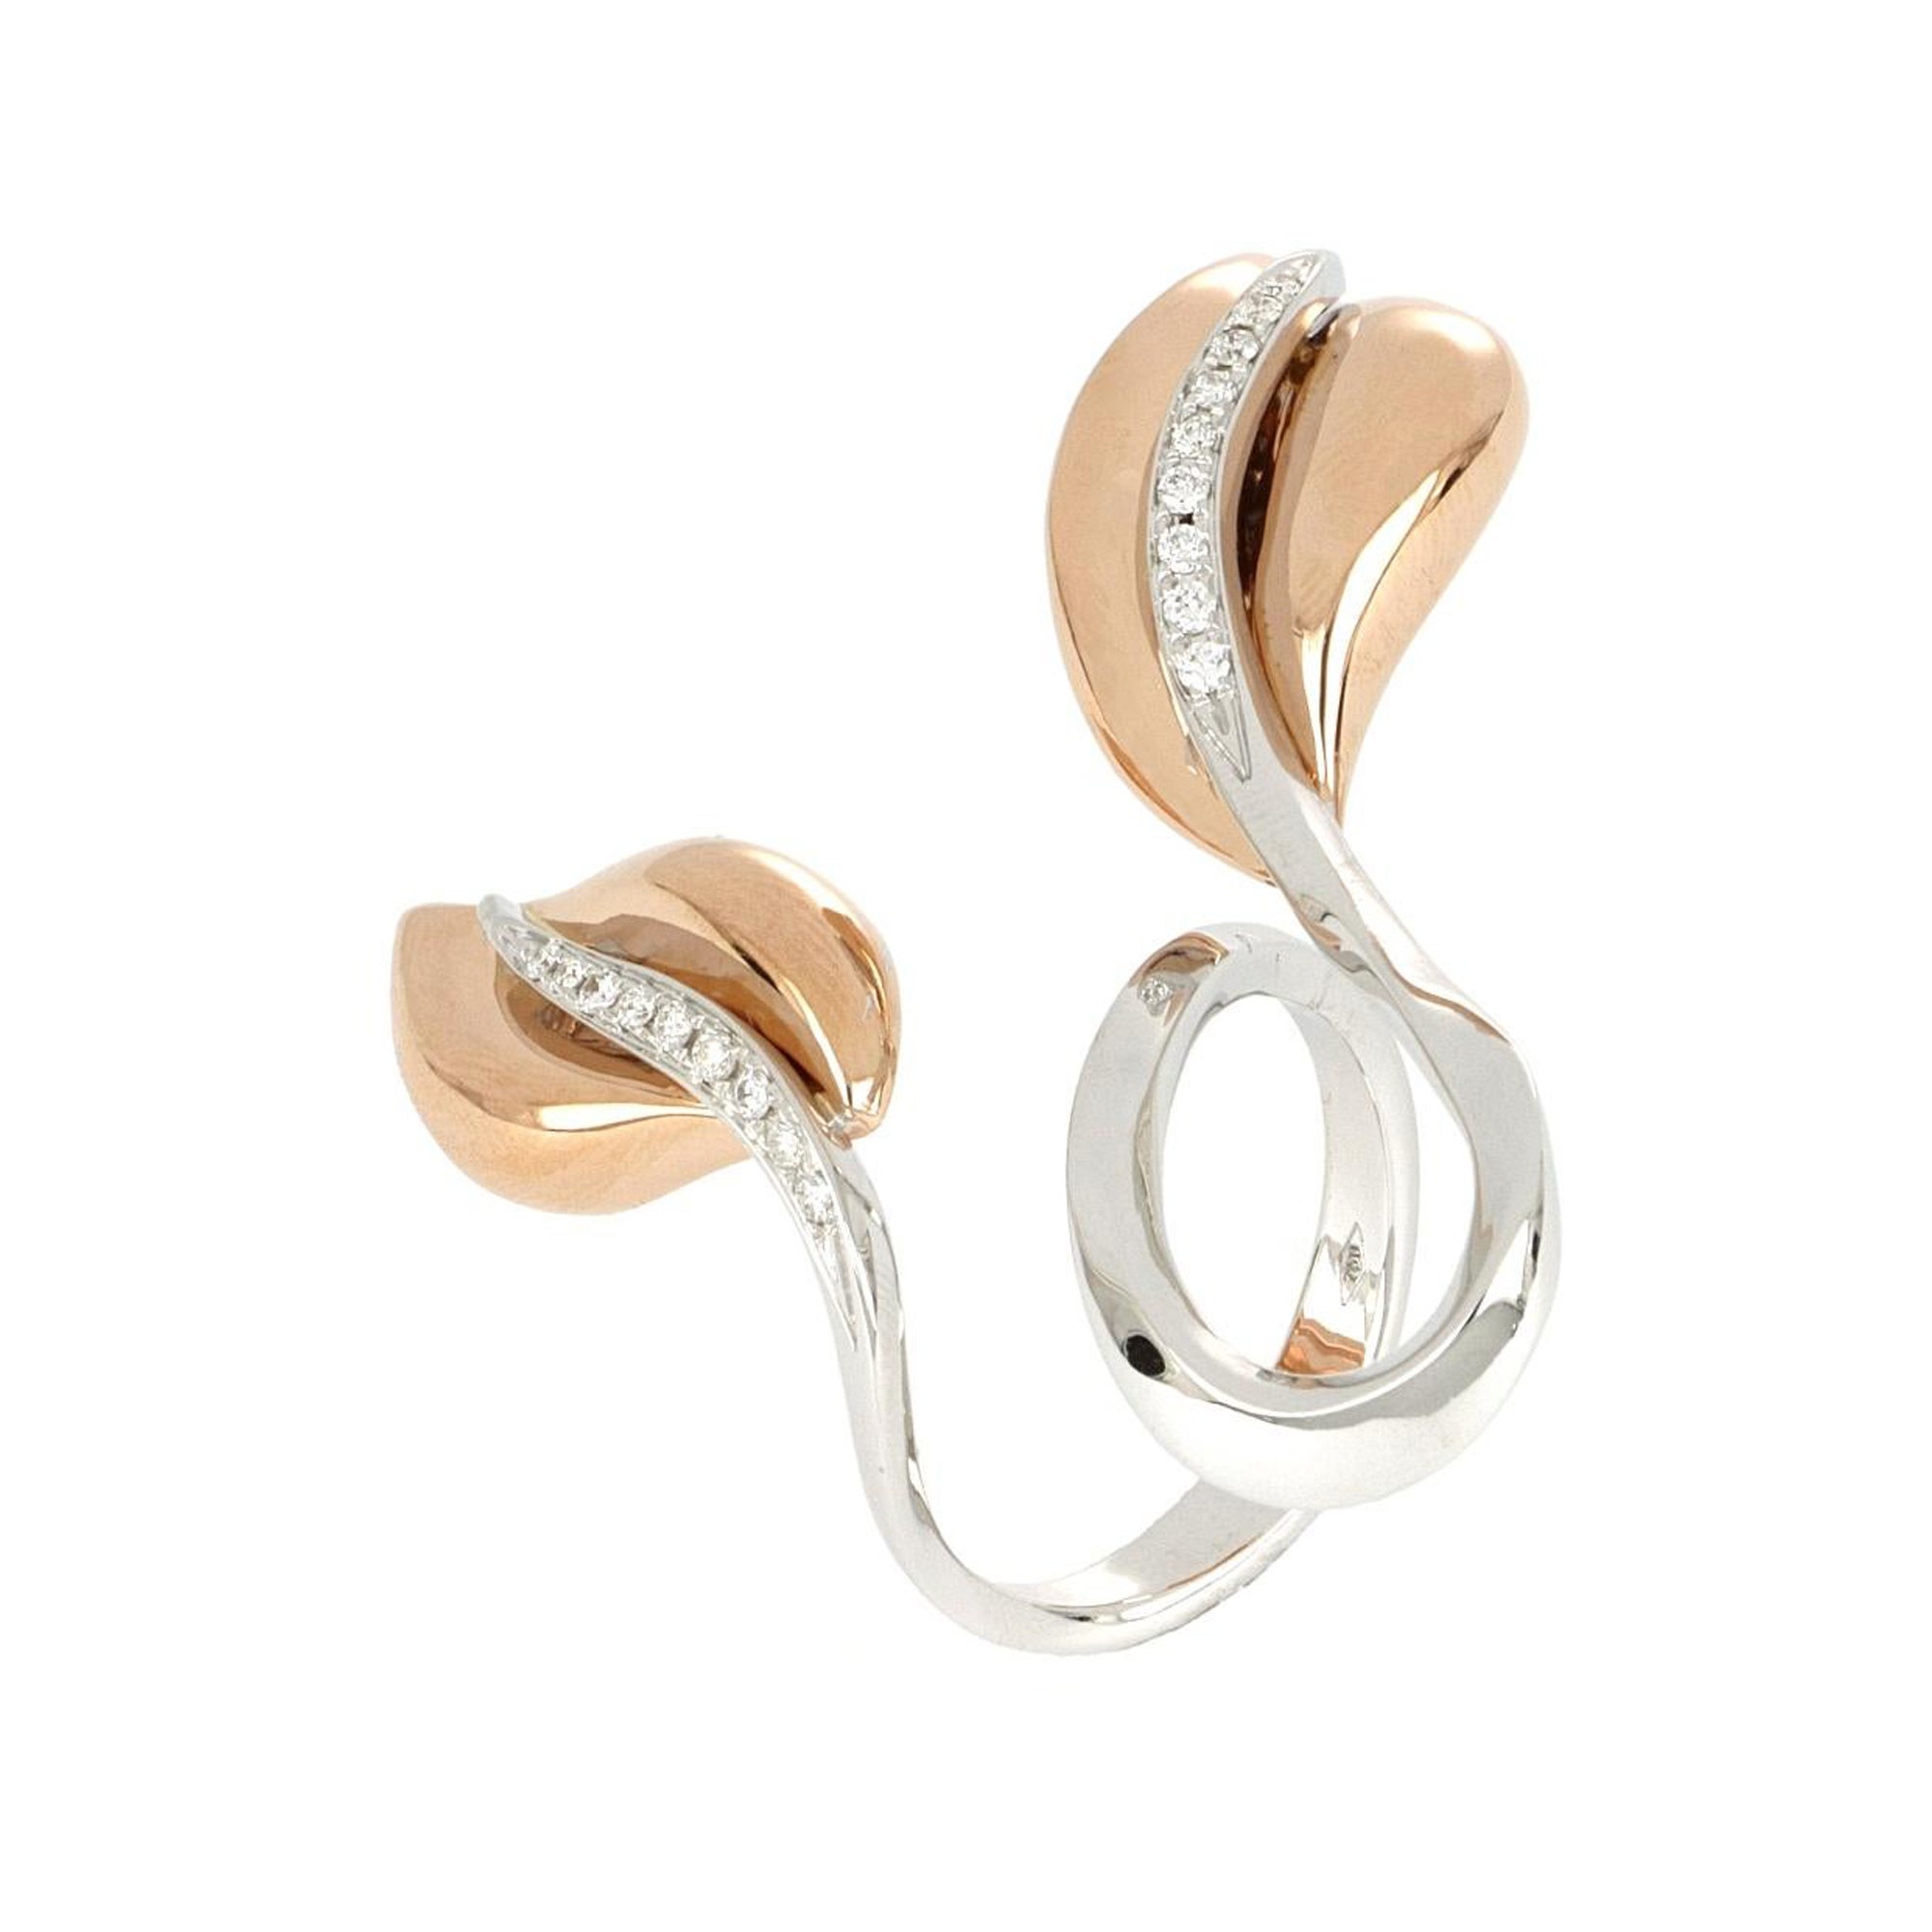 For Sale:  18kt White and Rose Gold 3 Chic Leaf Ring Decorated with Diamonds Pavè